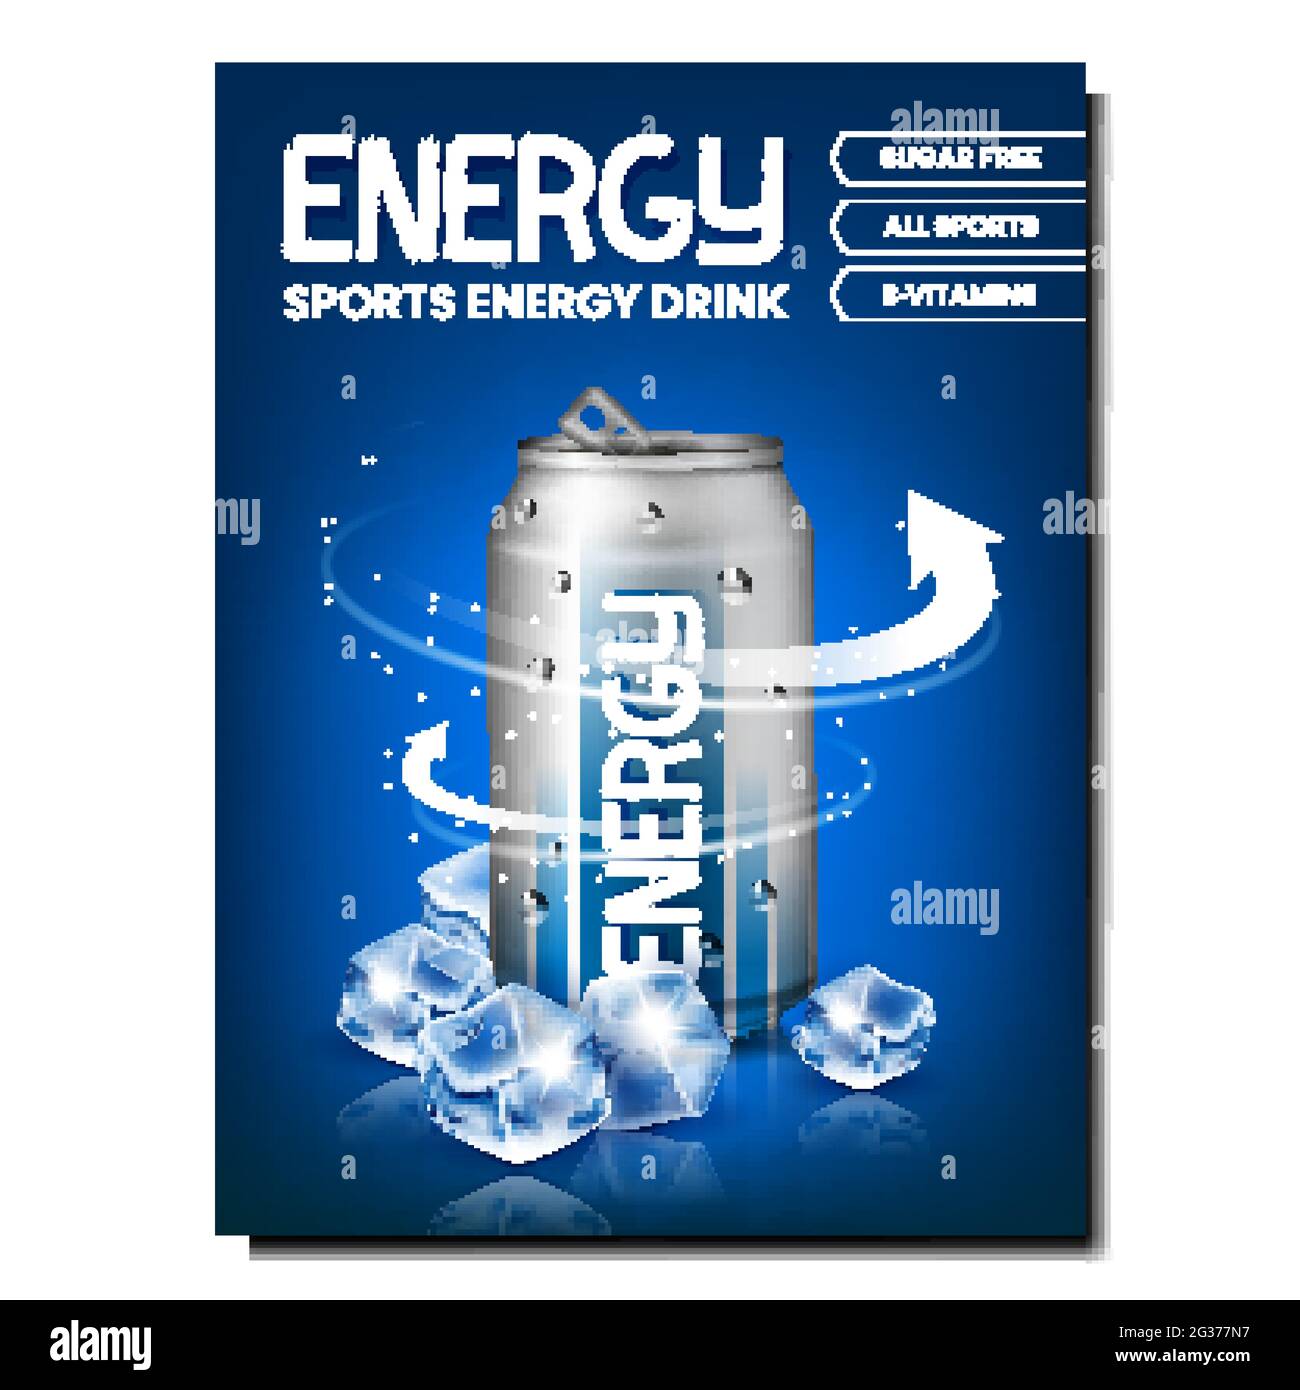 Sports Energy Drink Promotional Poster Vector Stock Vector Image